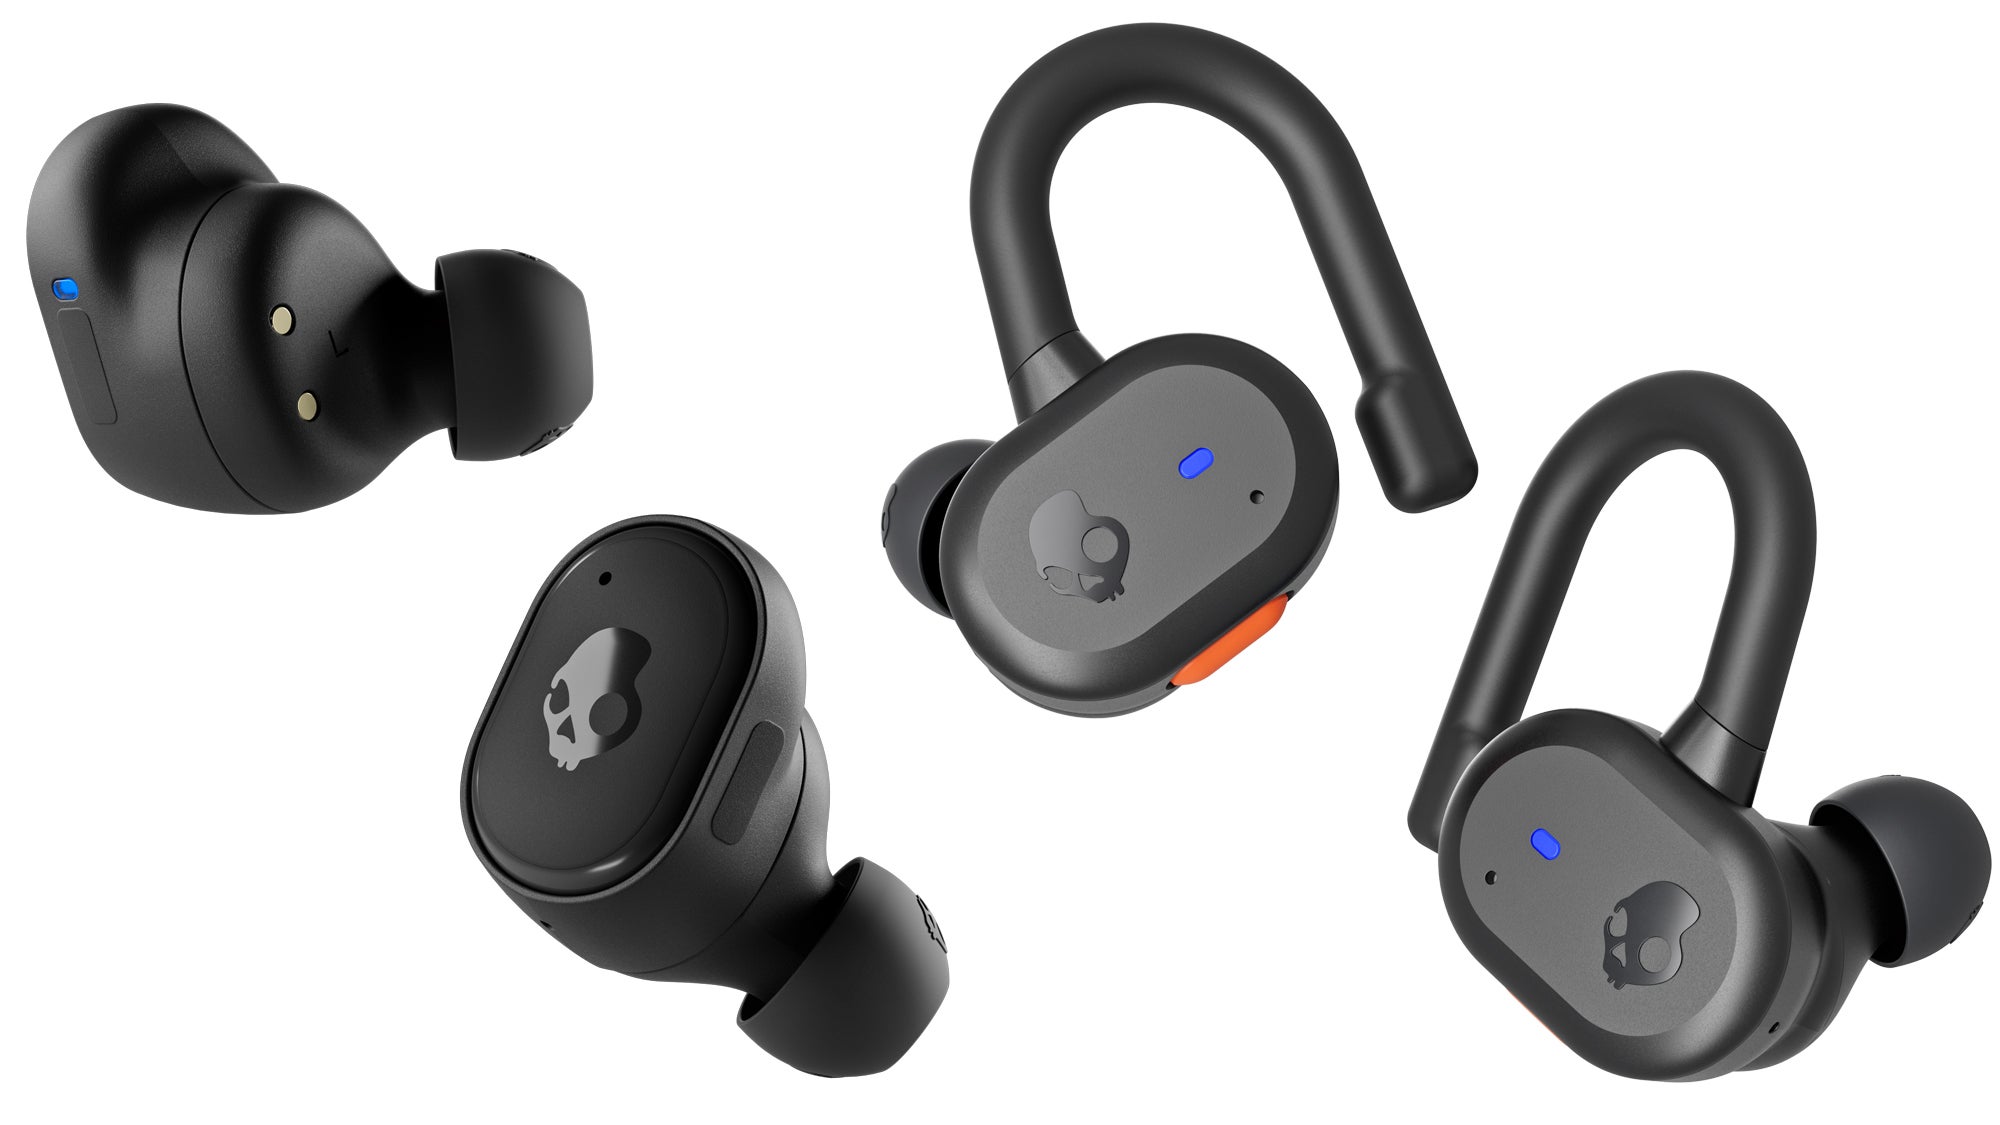 The Skullcandy Grind Fuel (left) compared to the Push Active (right). The latter includes a flexible over-the-ear support for a more secure fit during physical activities. (Image: Skullcandy)